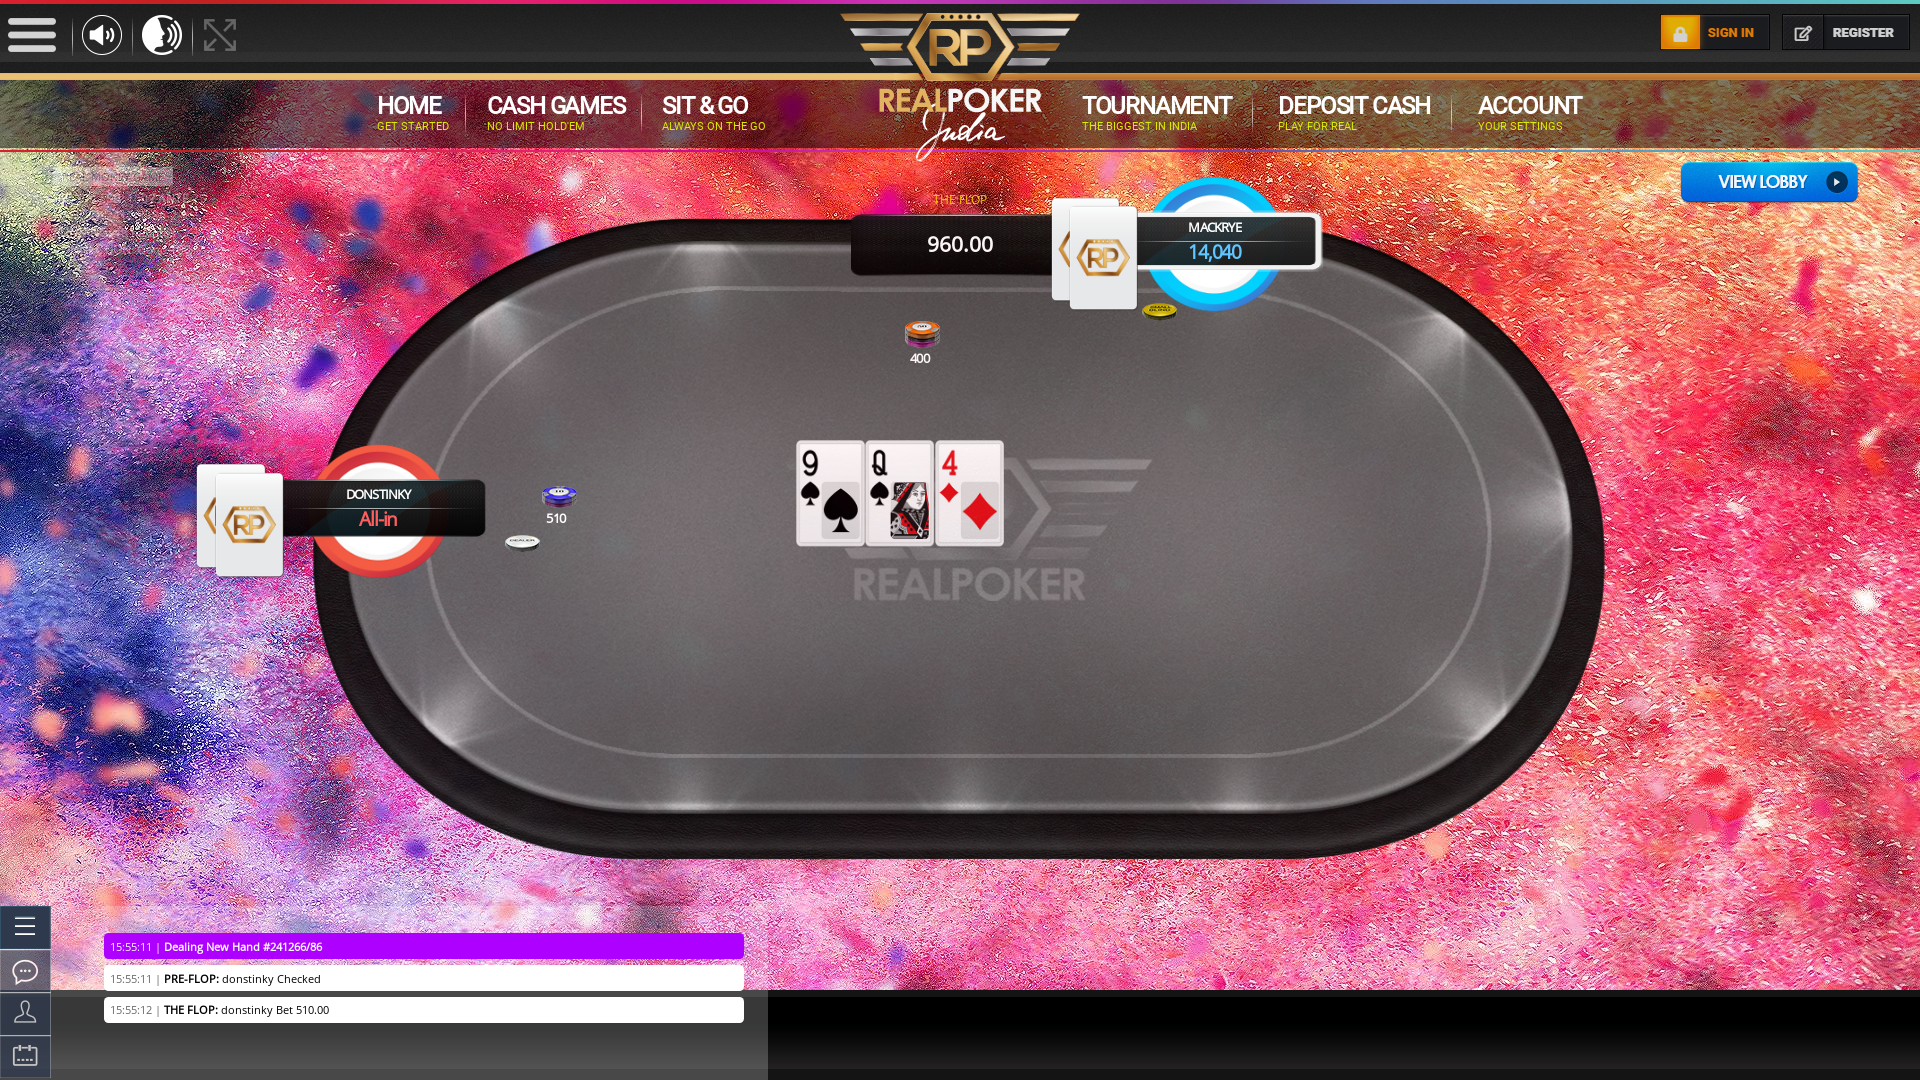 Jadavpur, Kolkata online poker game on a 10 player table in the 47th minute of the game